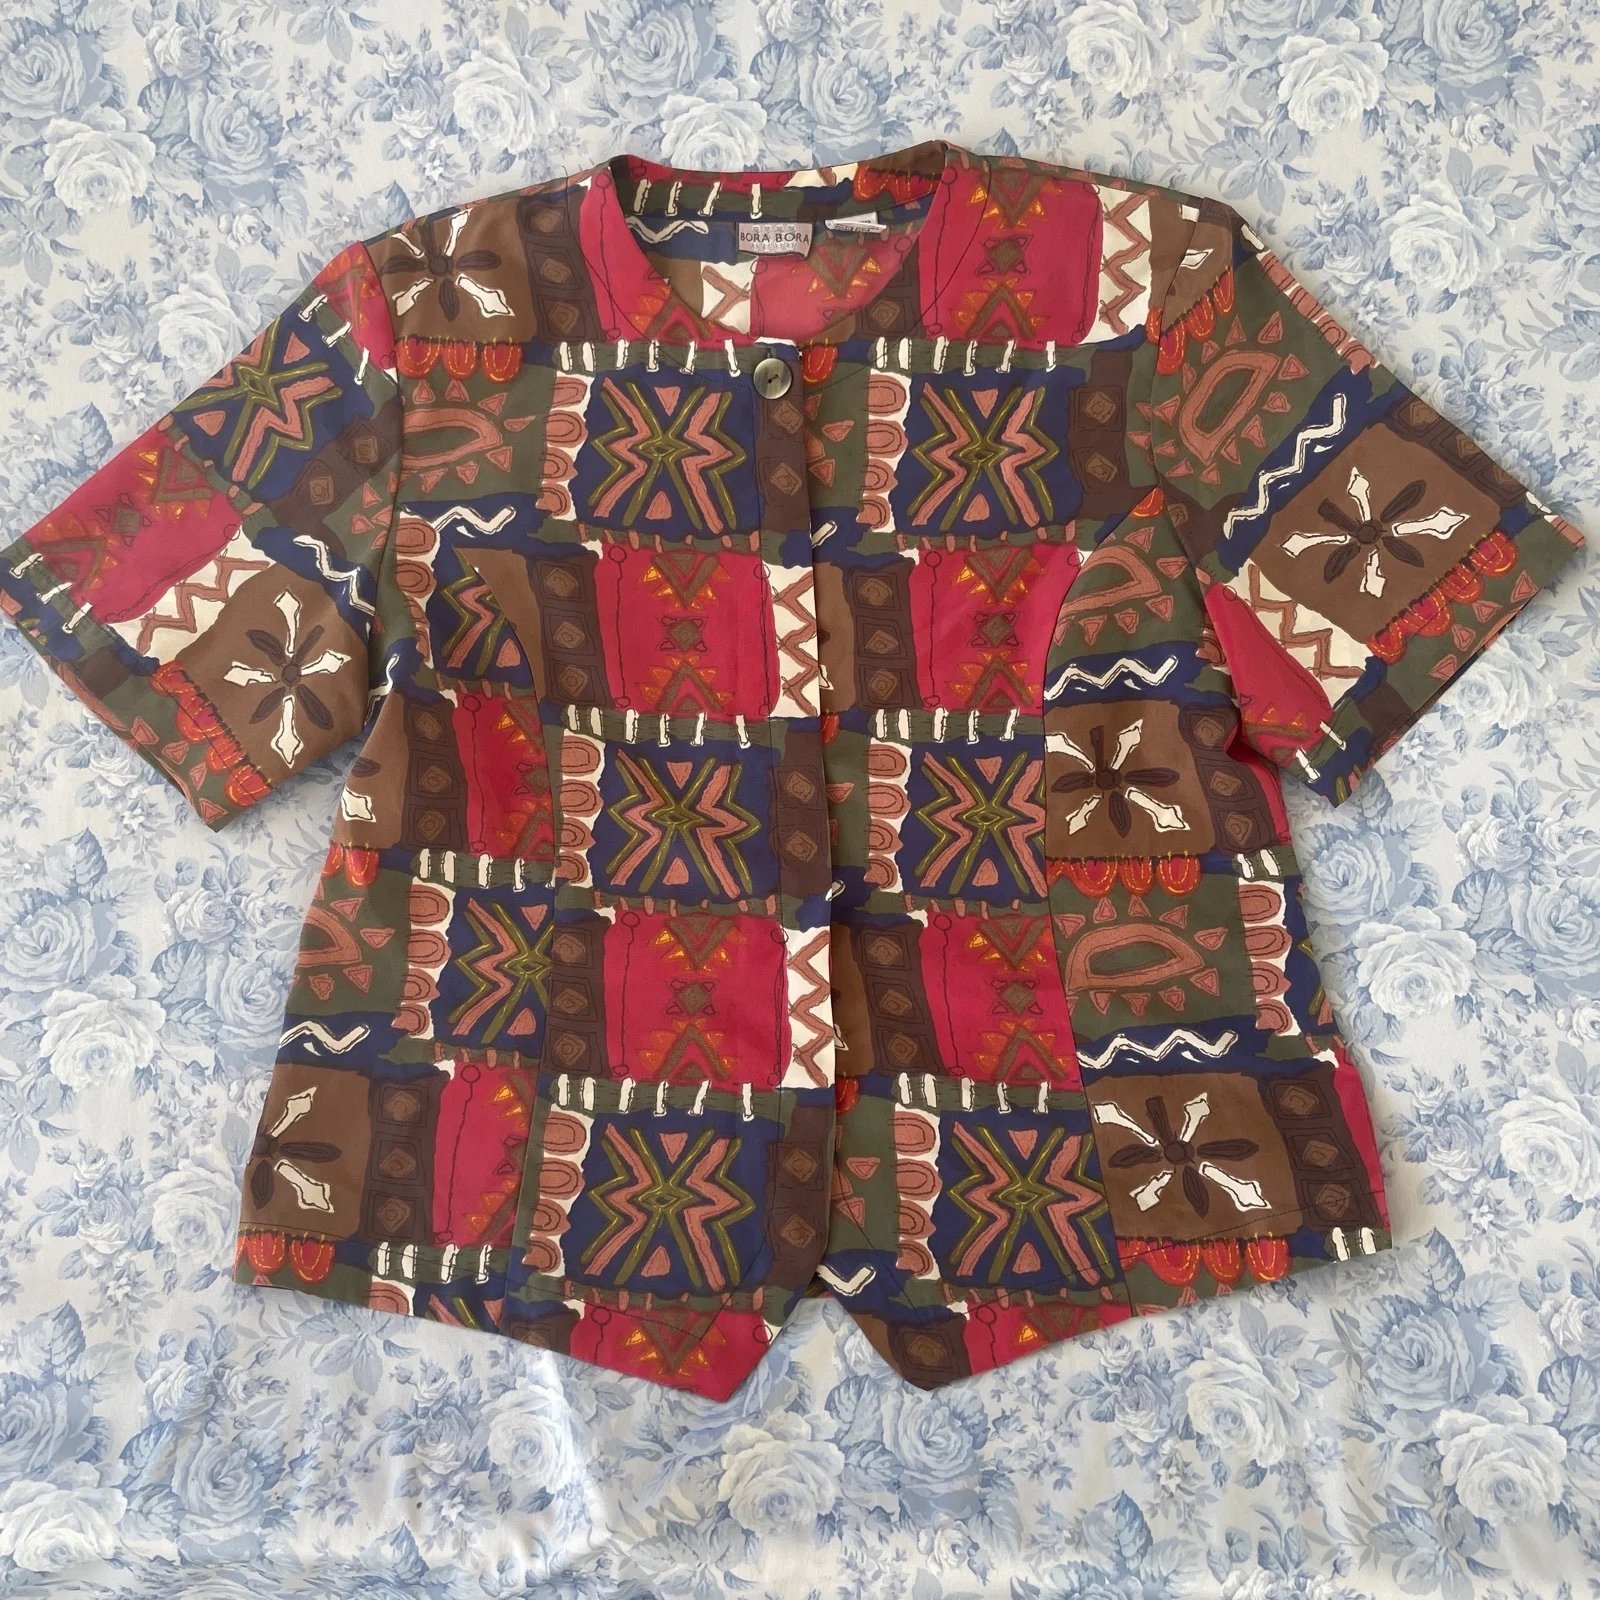 Custom Vintage Blouse Large Button Down Short Sleeved Hippy Print 80s Top Green Red Sun l640wC8pd New Style